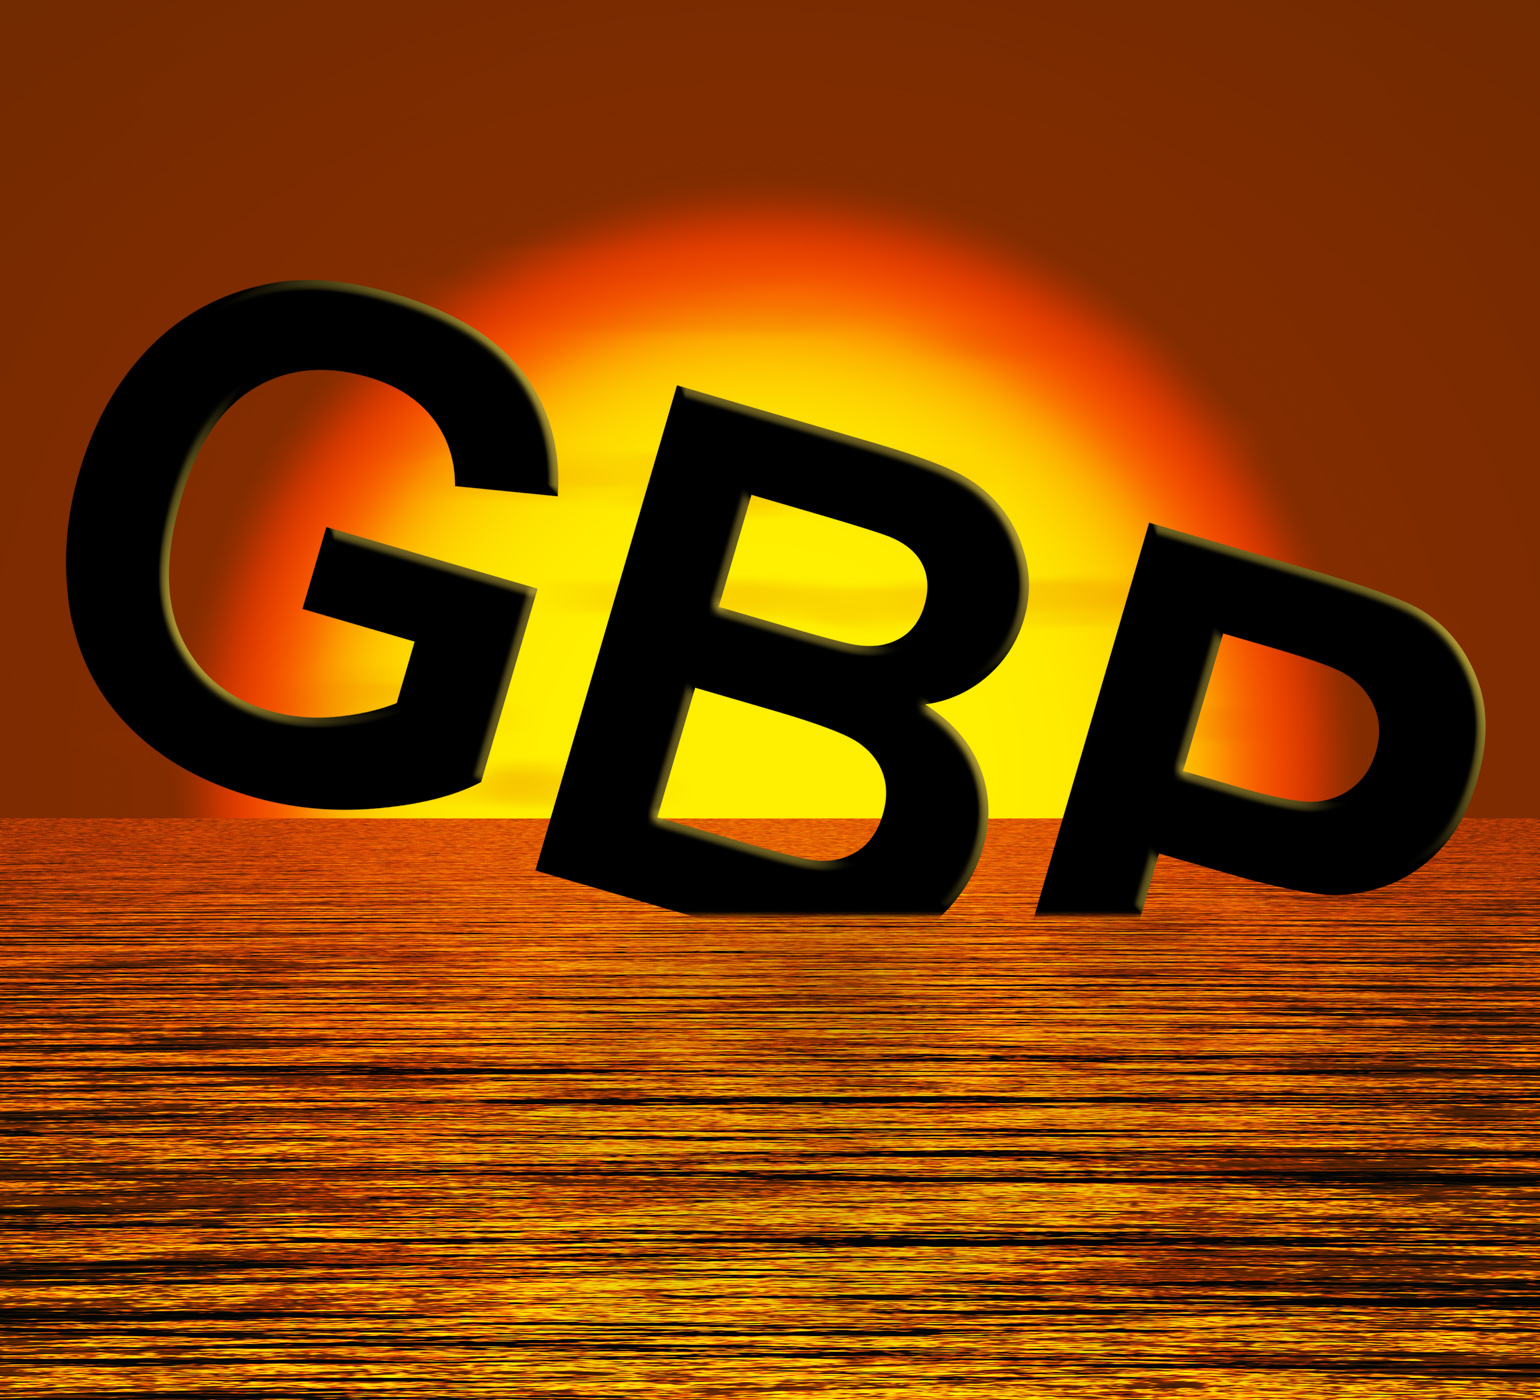 Gbp word sinking and sunset showing depression recession and economic photo